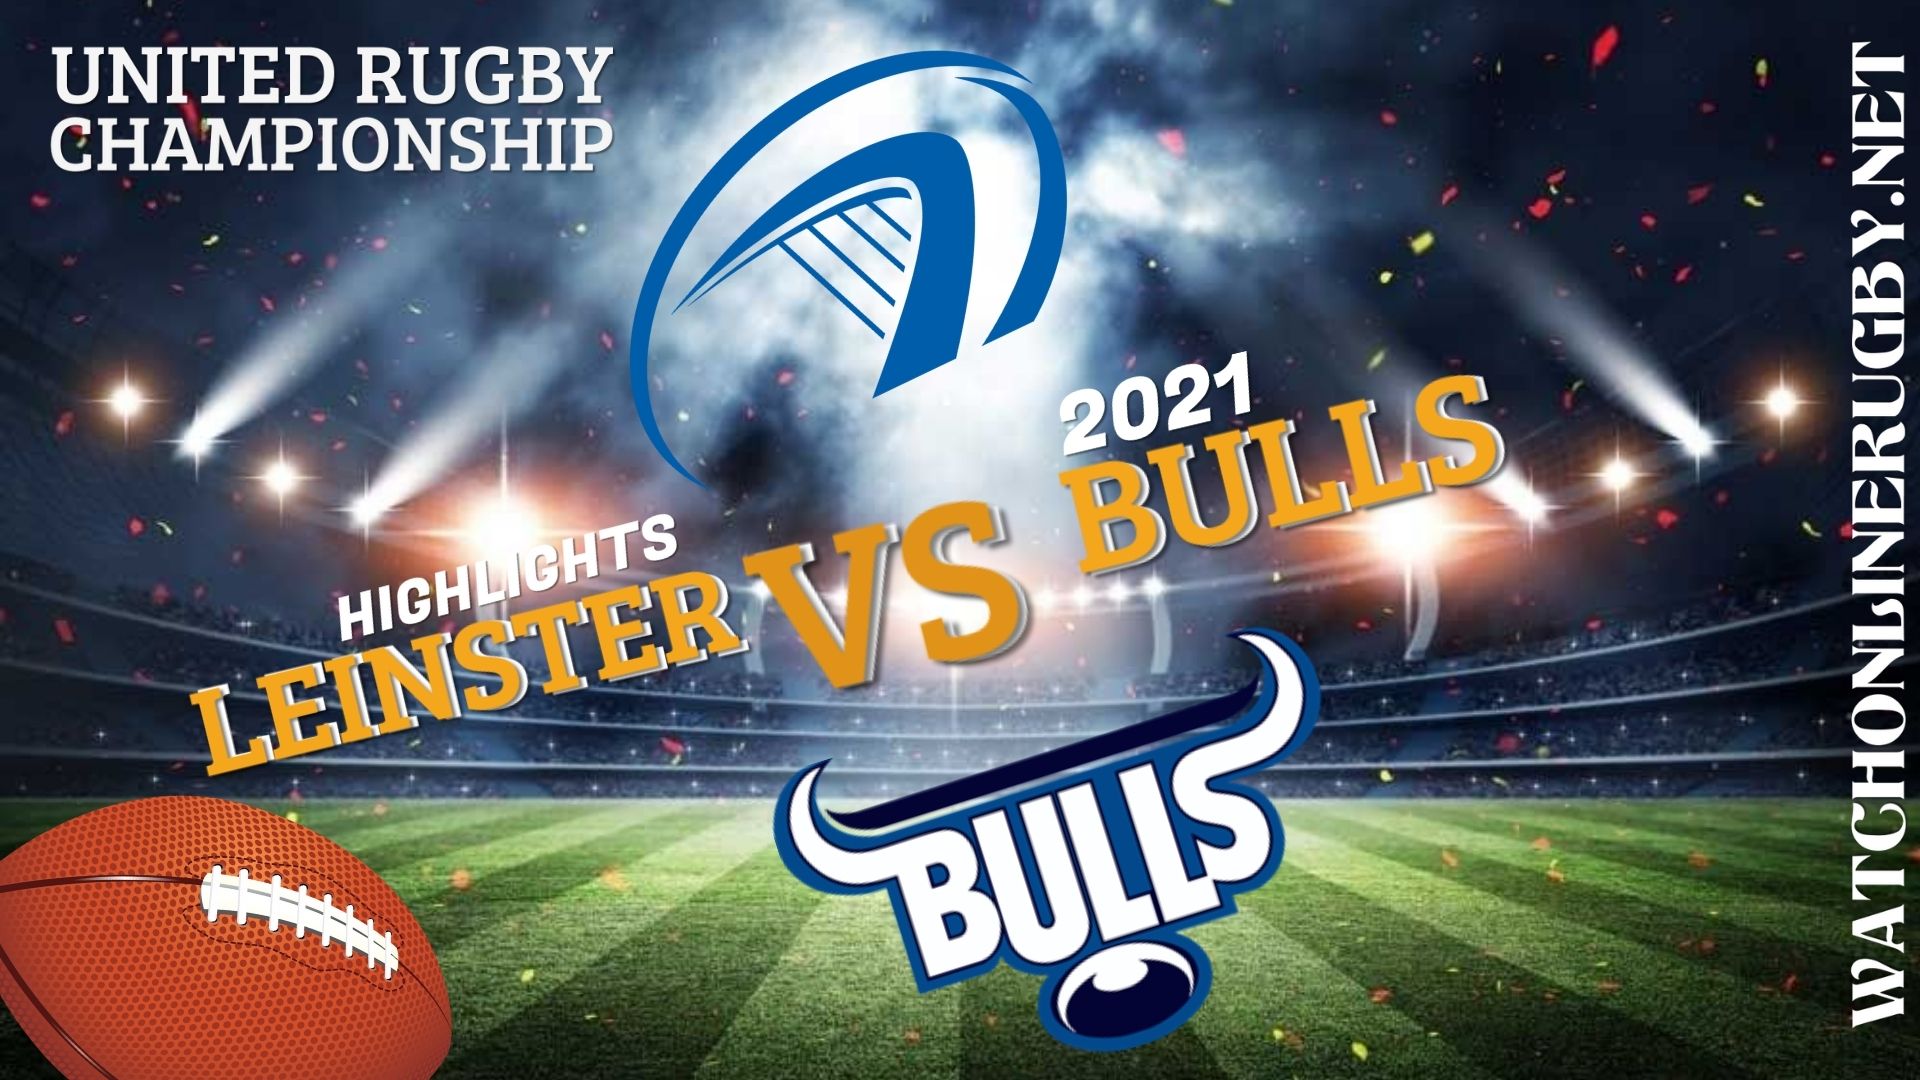 Leinster Vs Bulls United Rugby Championship 2021 RD 1